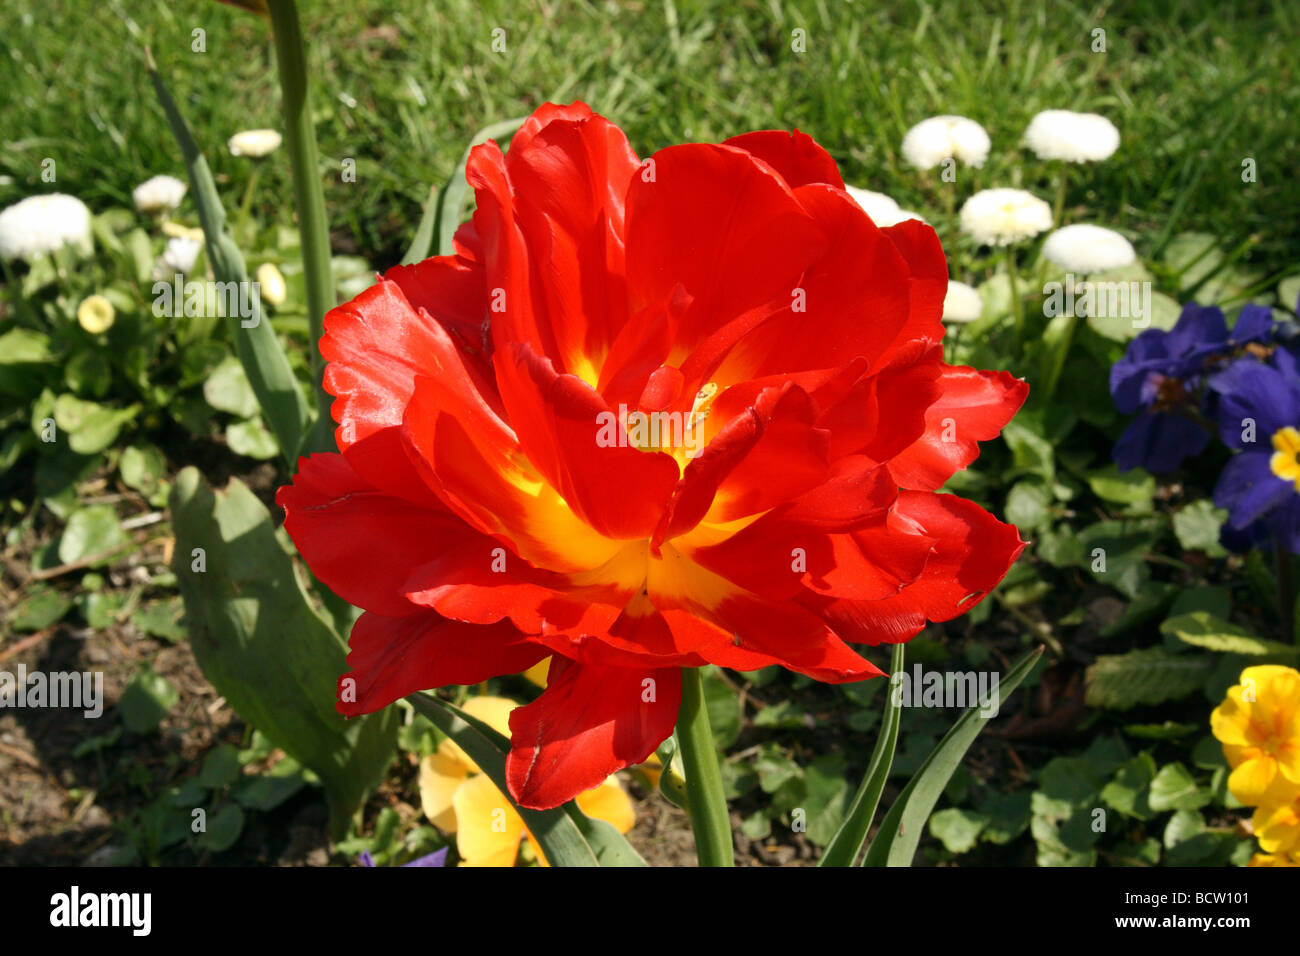 Parrot Tulips Family Liliaceae colour flowers named after colourd birds Yellow and red Cultivars are popular border plants Stock Photo